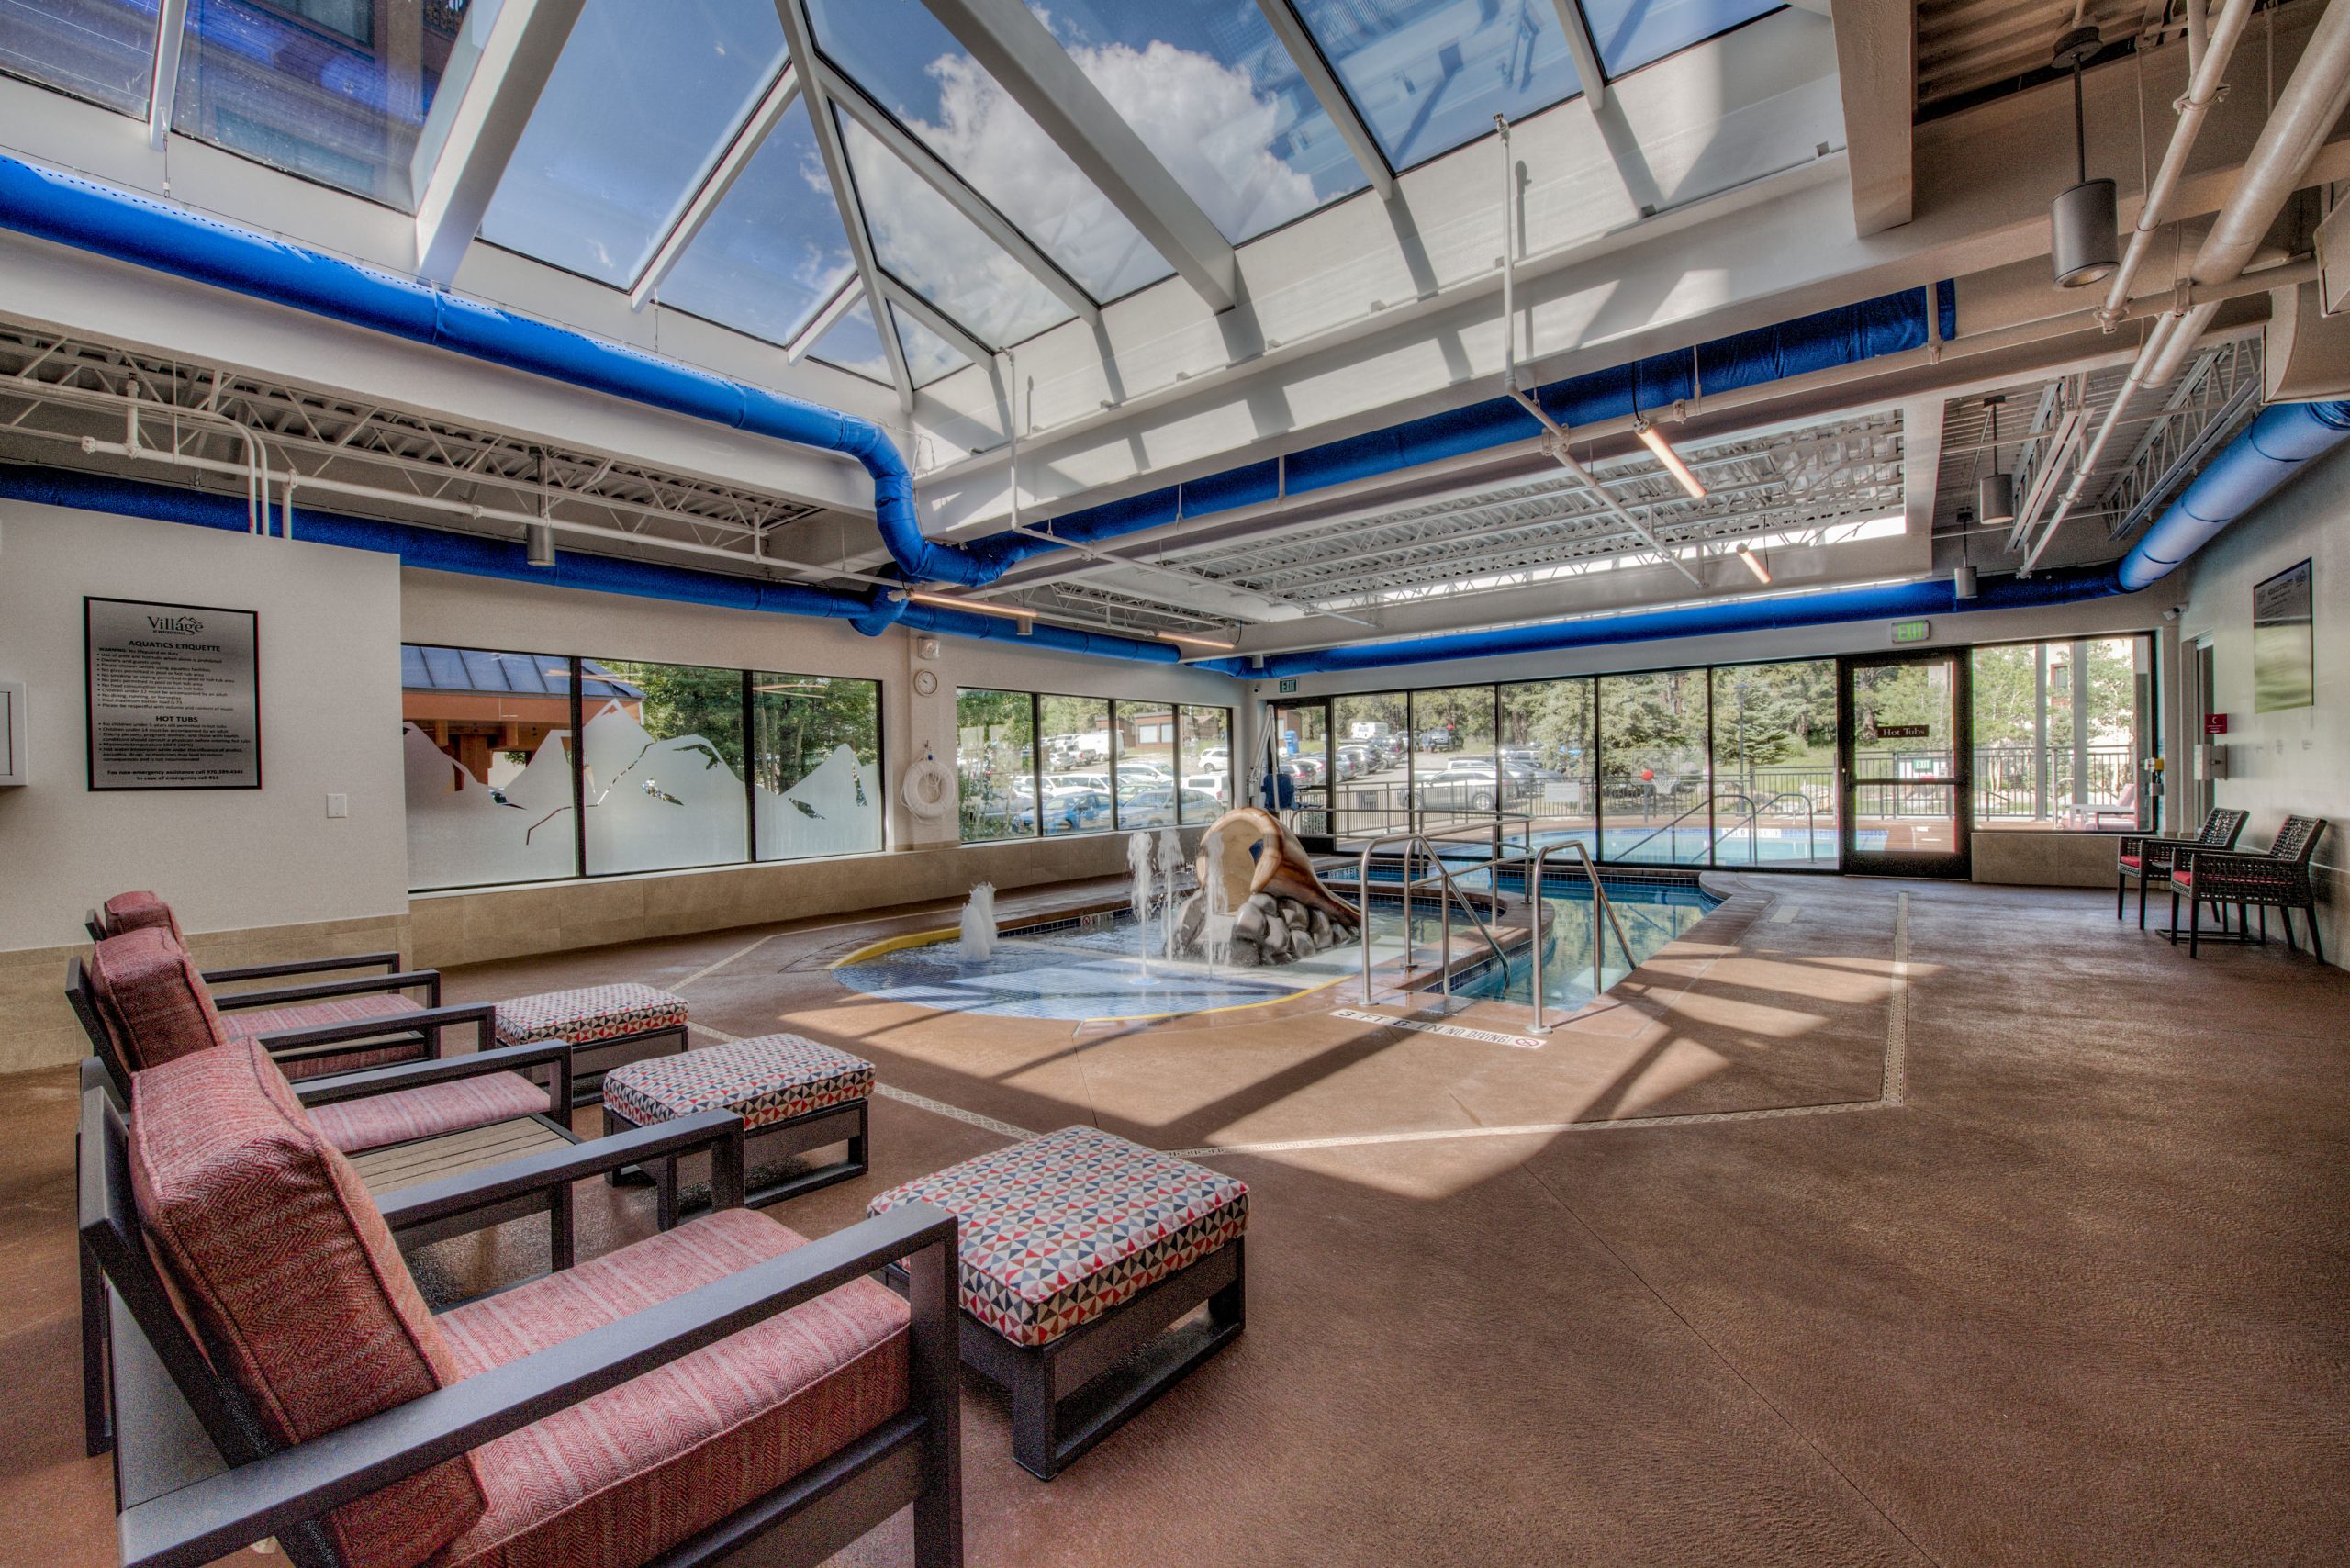 The indoor pool at The Village Breckenridge is kid friendly and is steps away from the larger outdoor pool. 